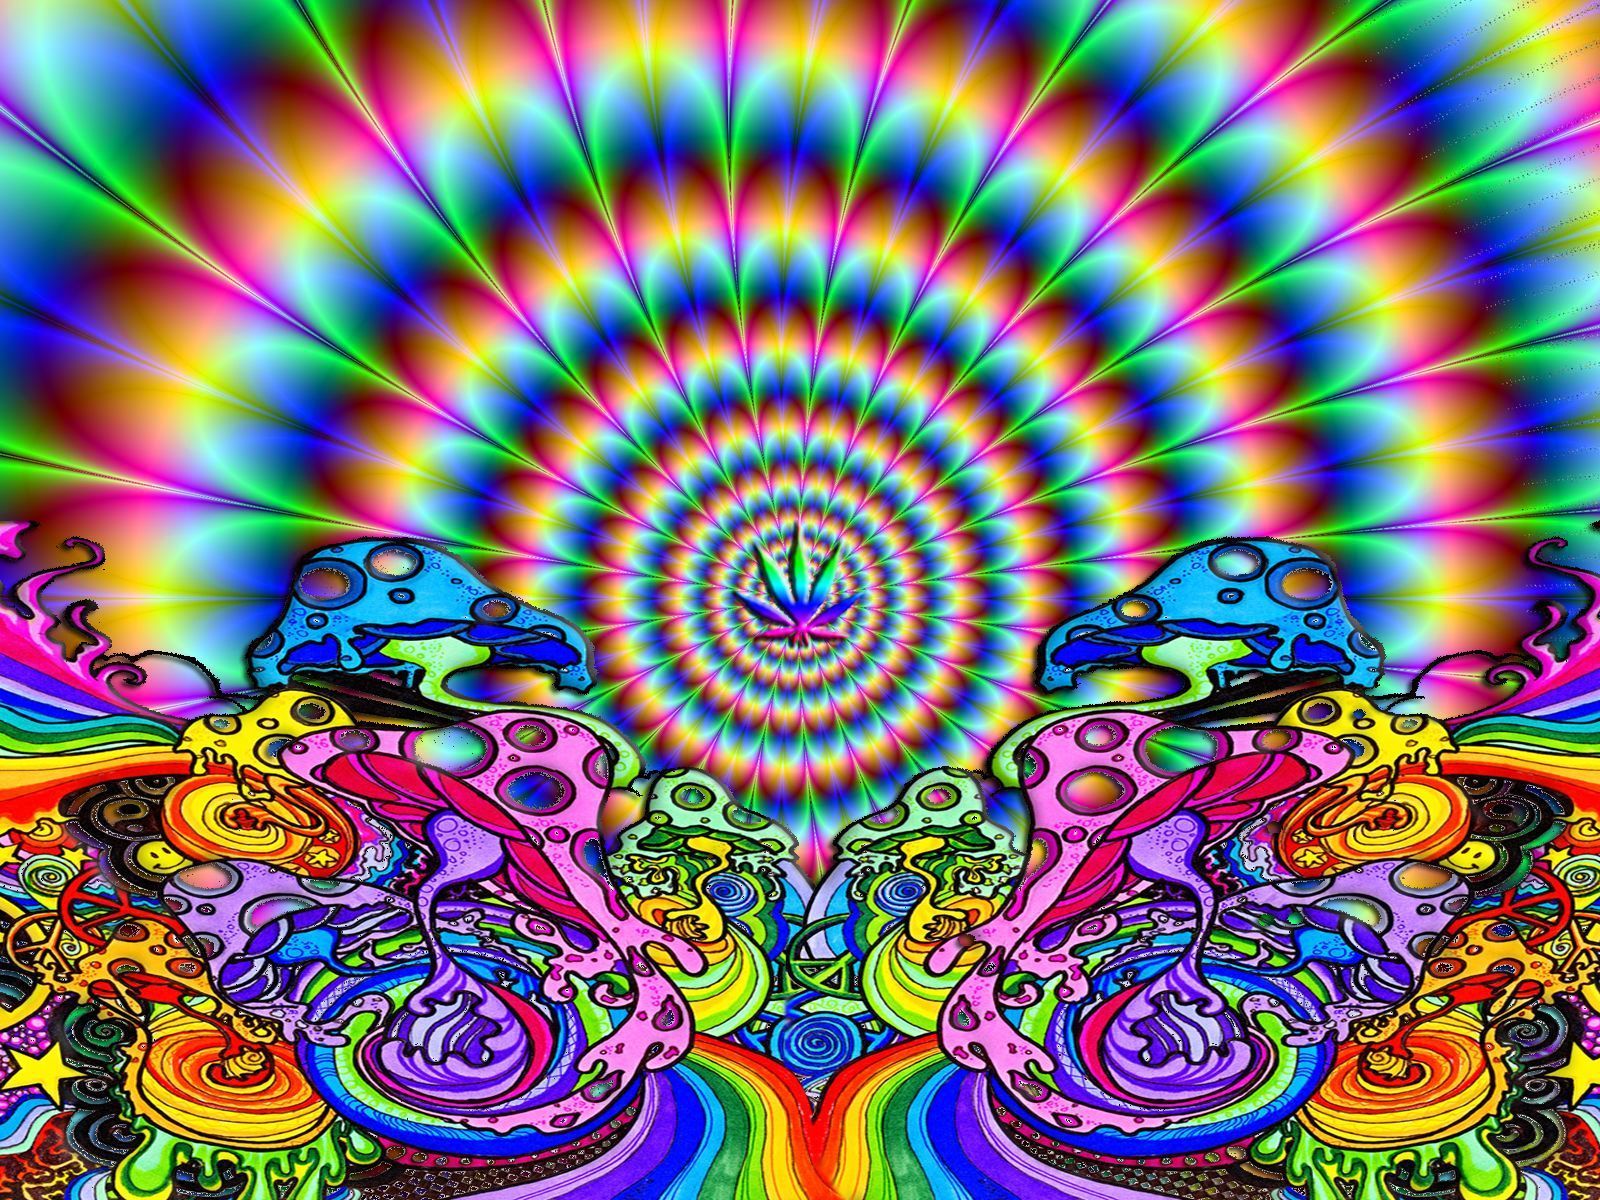 Trippy Weed Wallpaper Free Trippy Weed Background